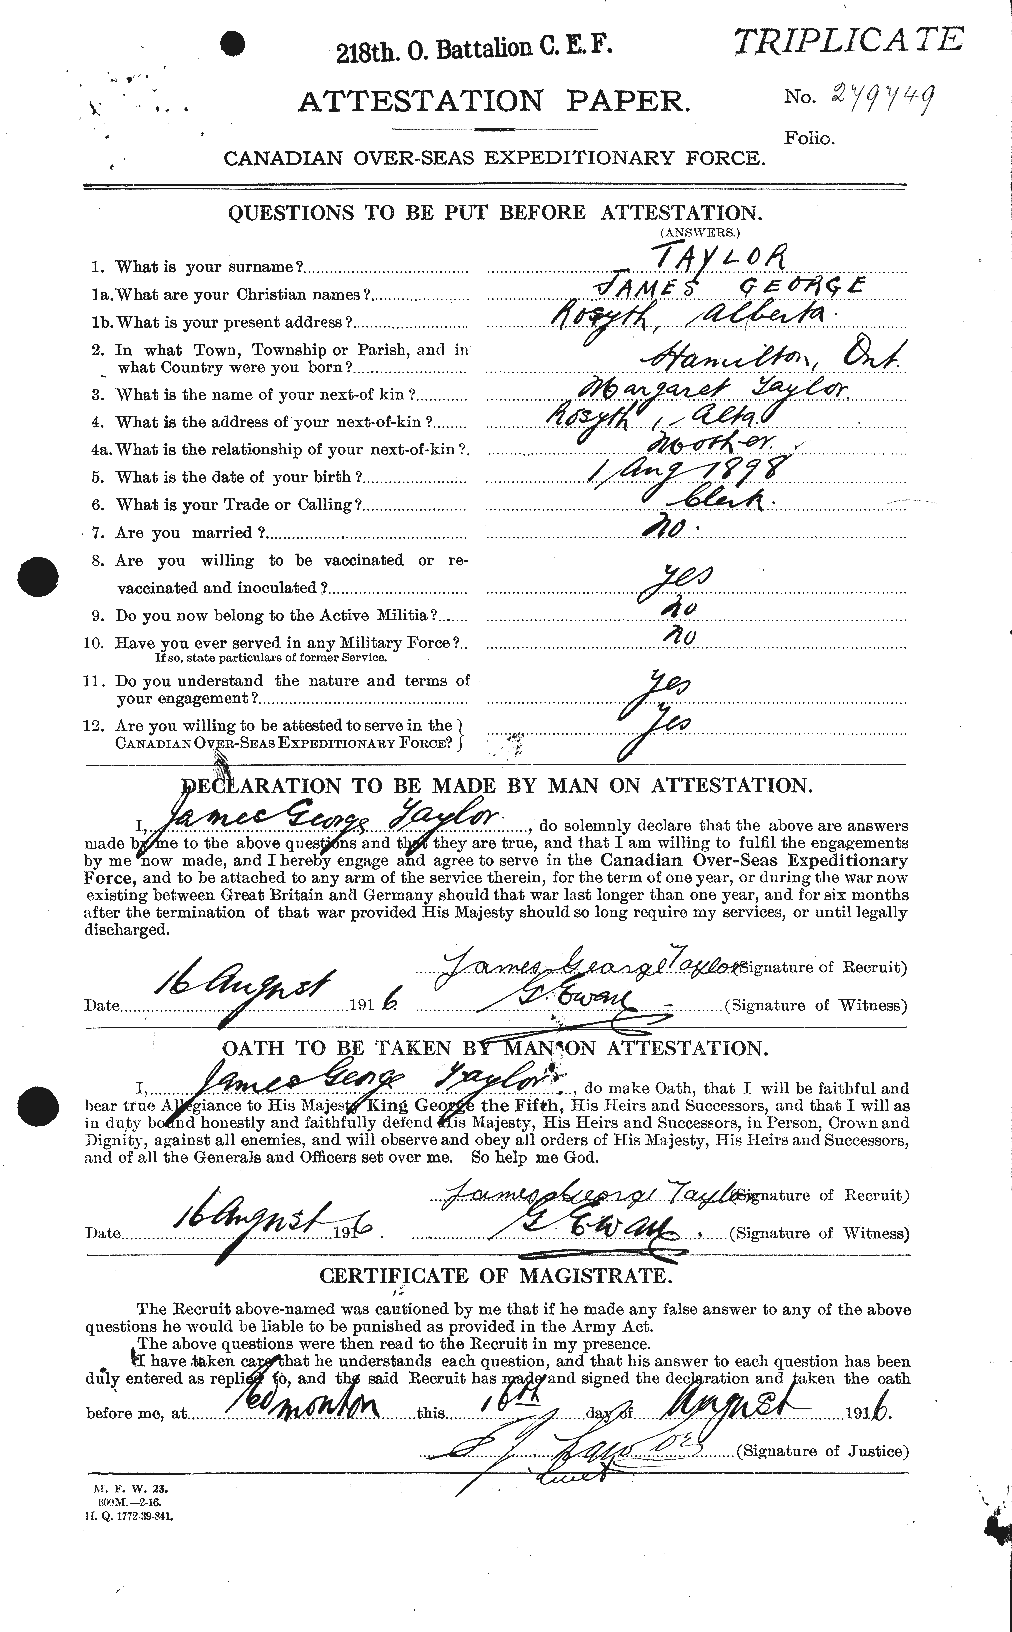 Personnel Records of the First World War - CEF 626920a